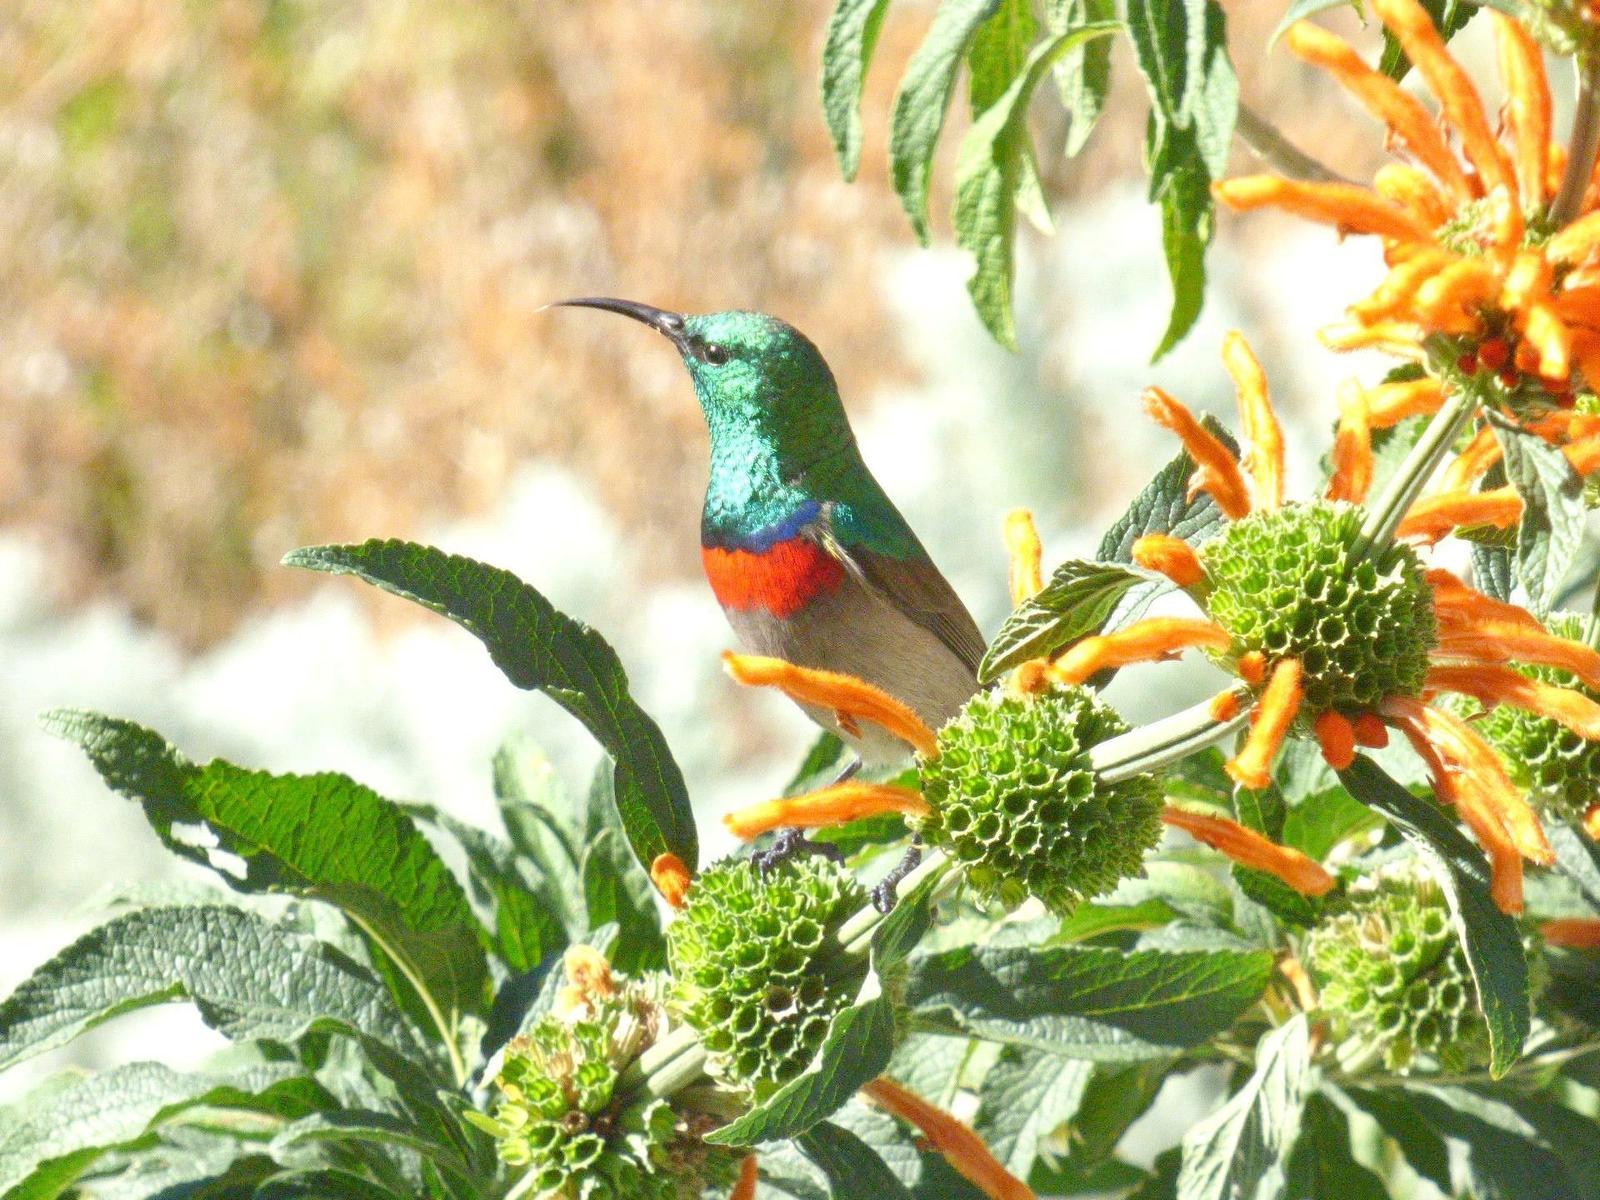 Southern Double-collared Sunbird Photo by James Pierce